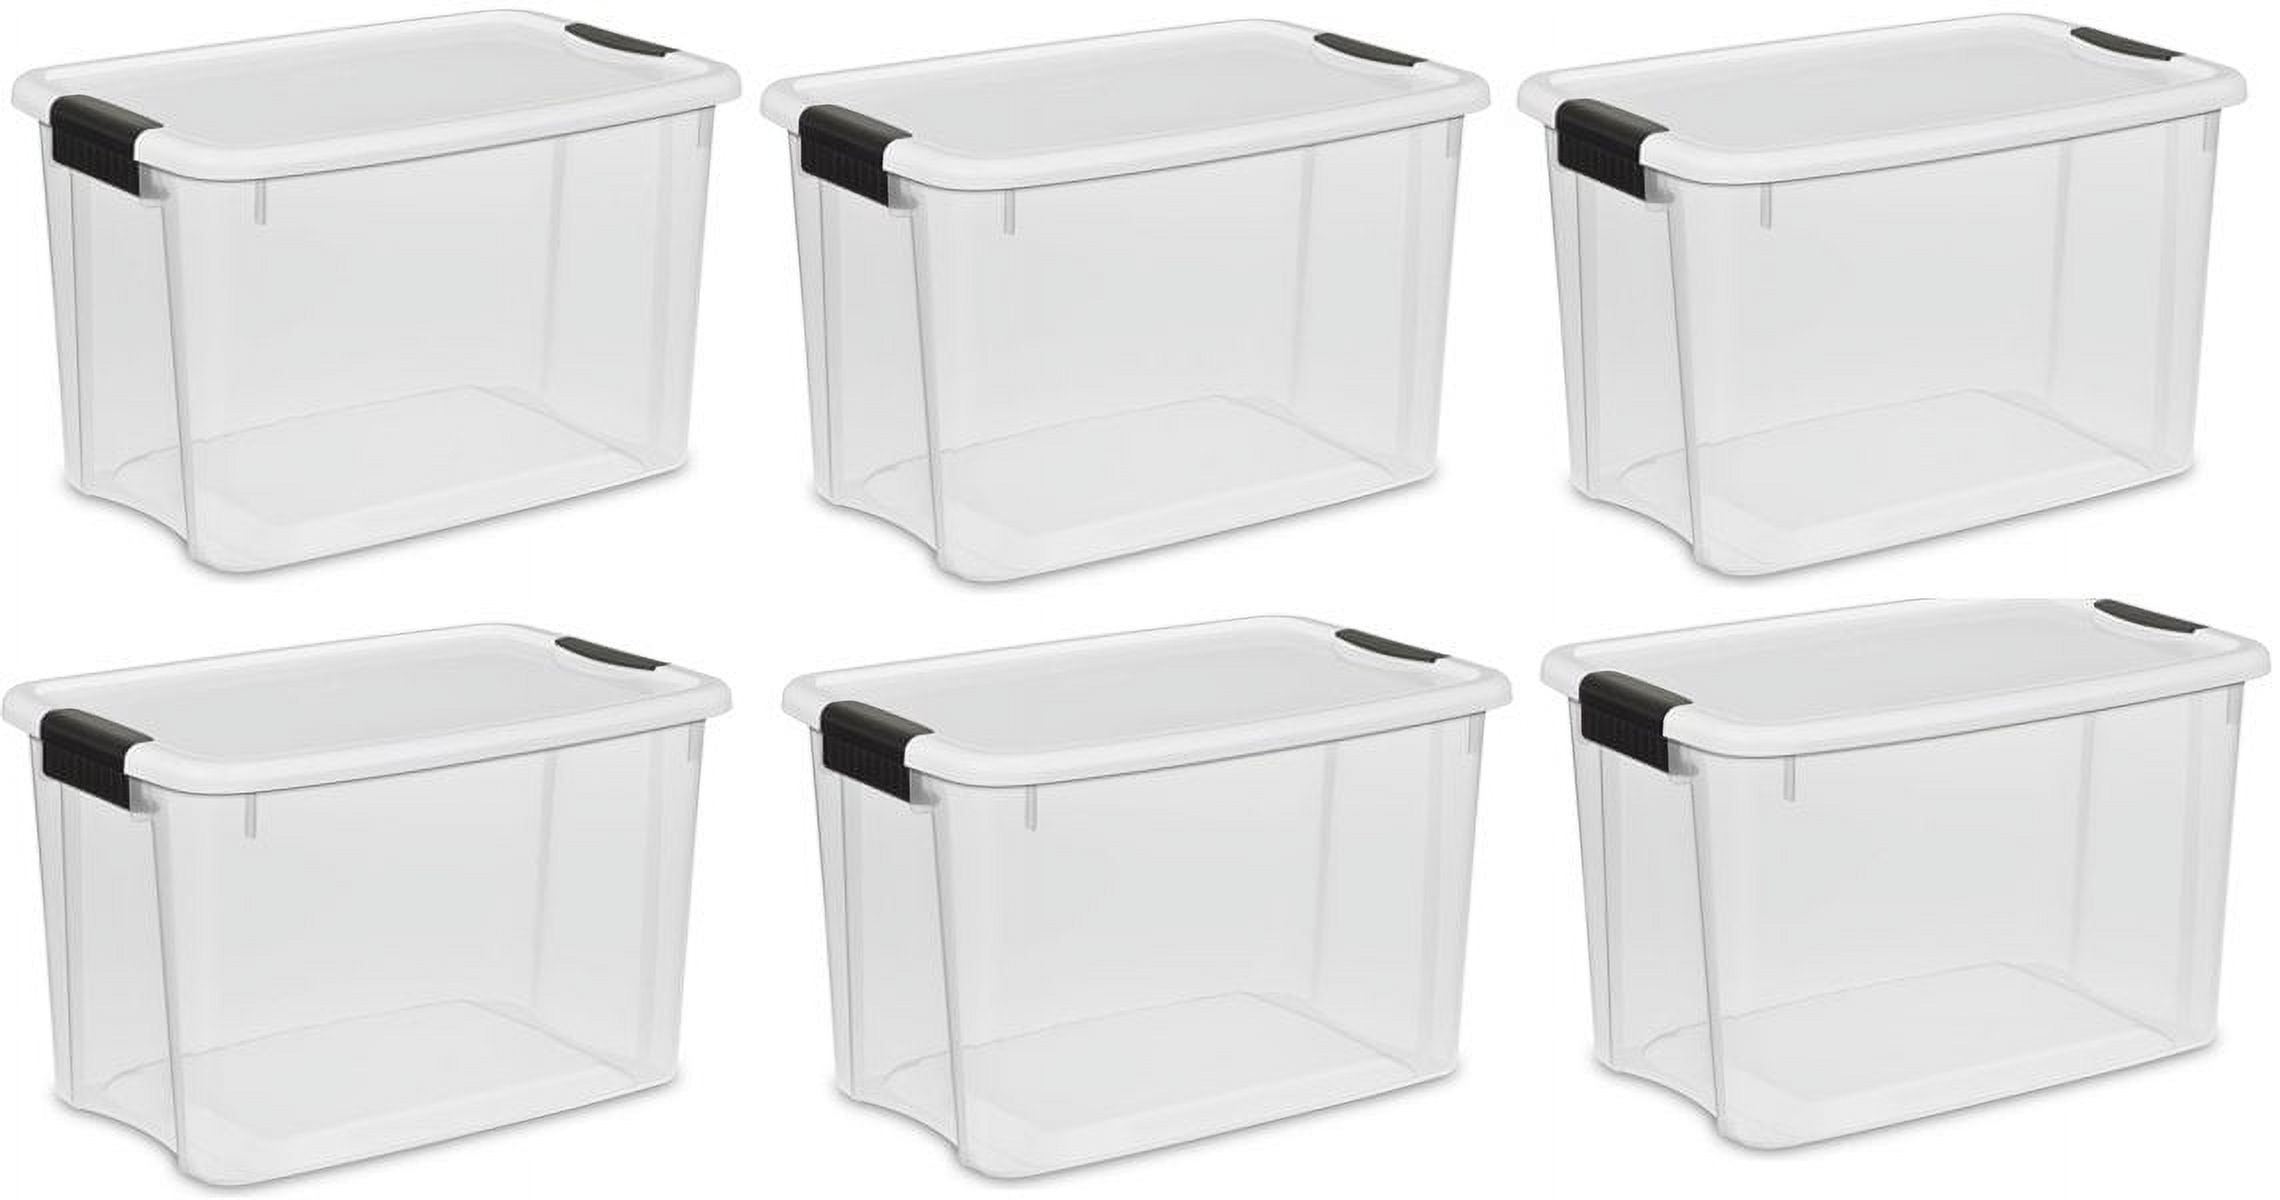 Sterilite 03121606 4-1/2 Cup Rectangular Leaf Accents Container